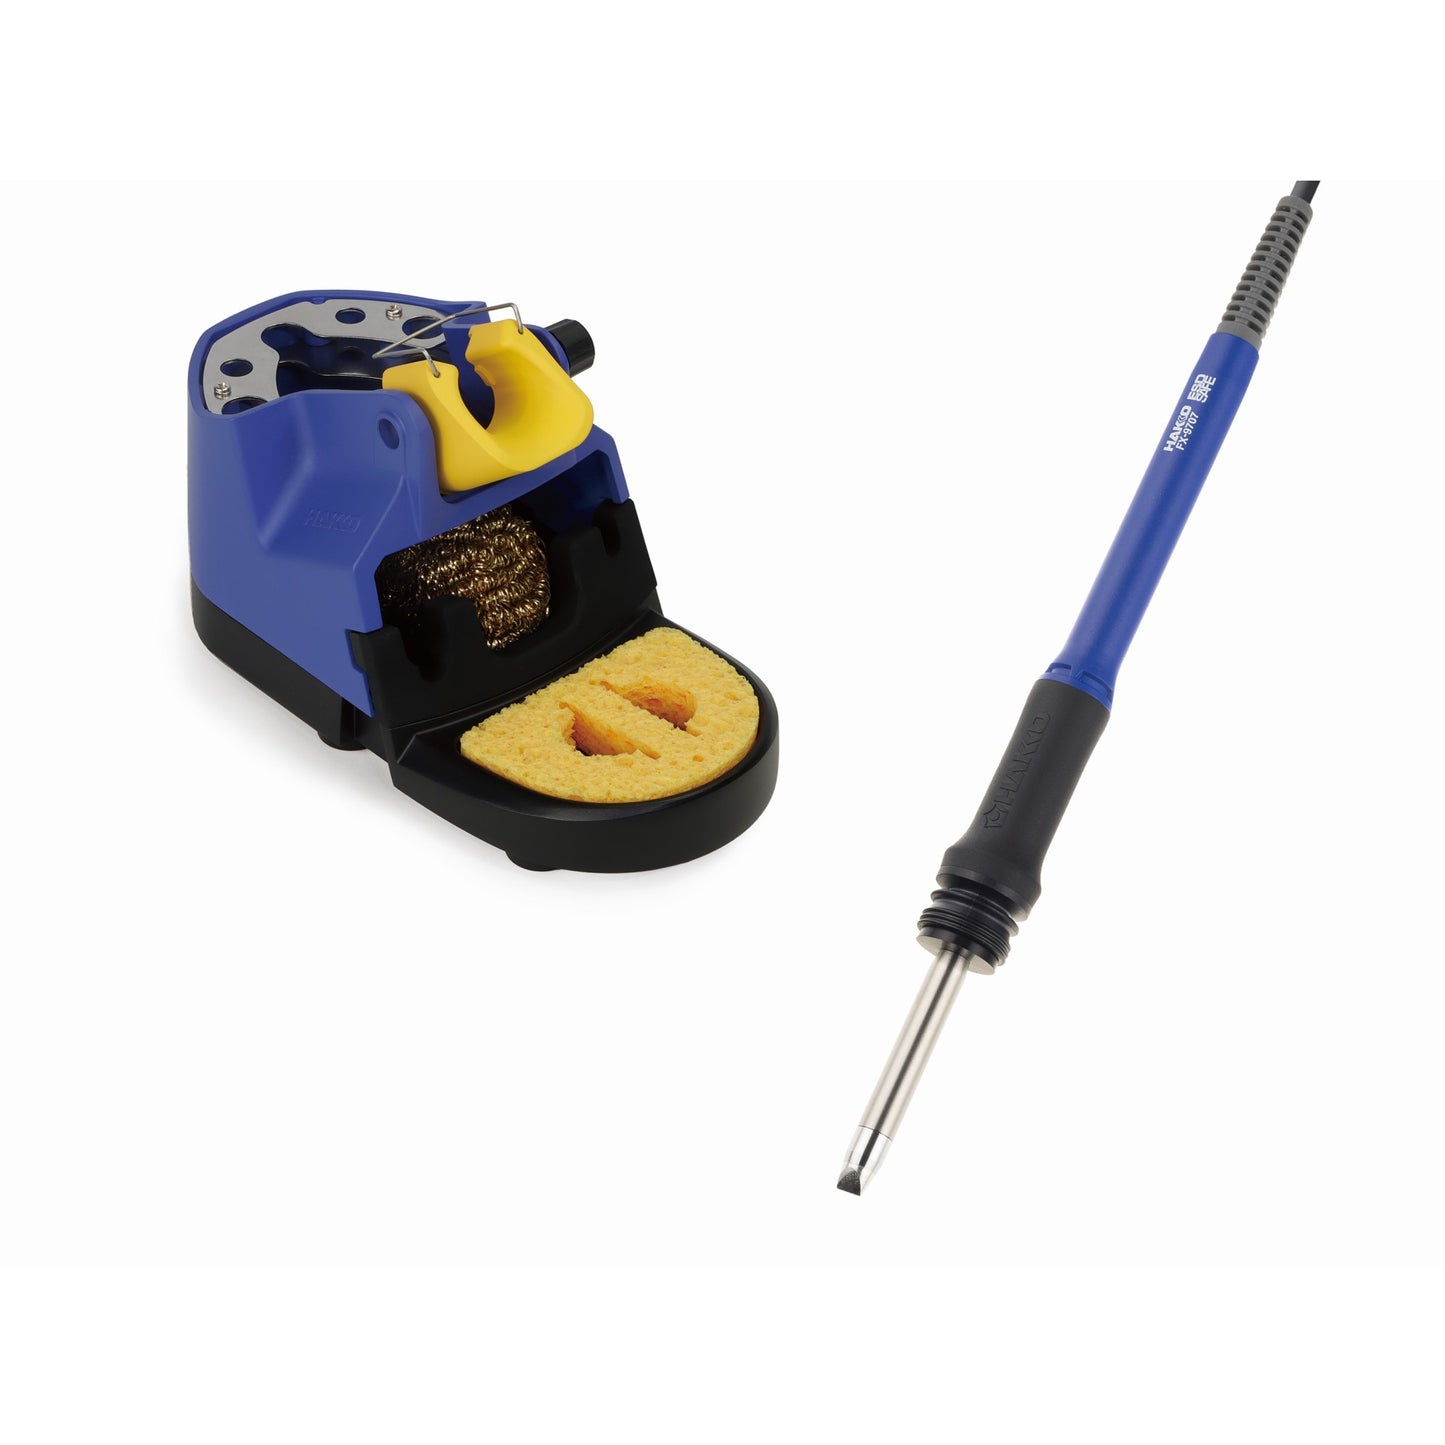 Hakko heavy duty soldering iron FX9707 high powered increased efficiency for hand manual soldering using FX972 soldering station PCB board processing